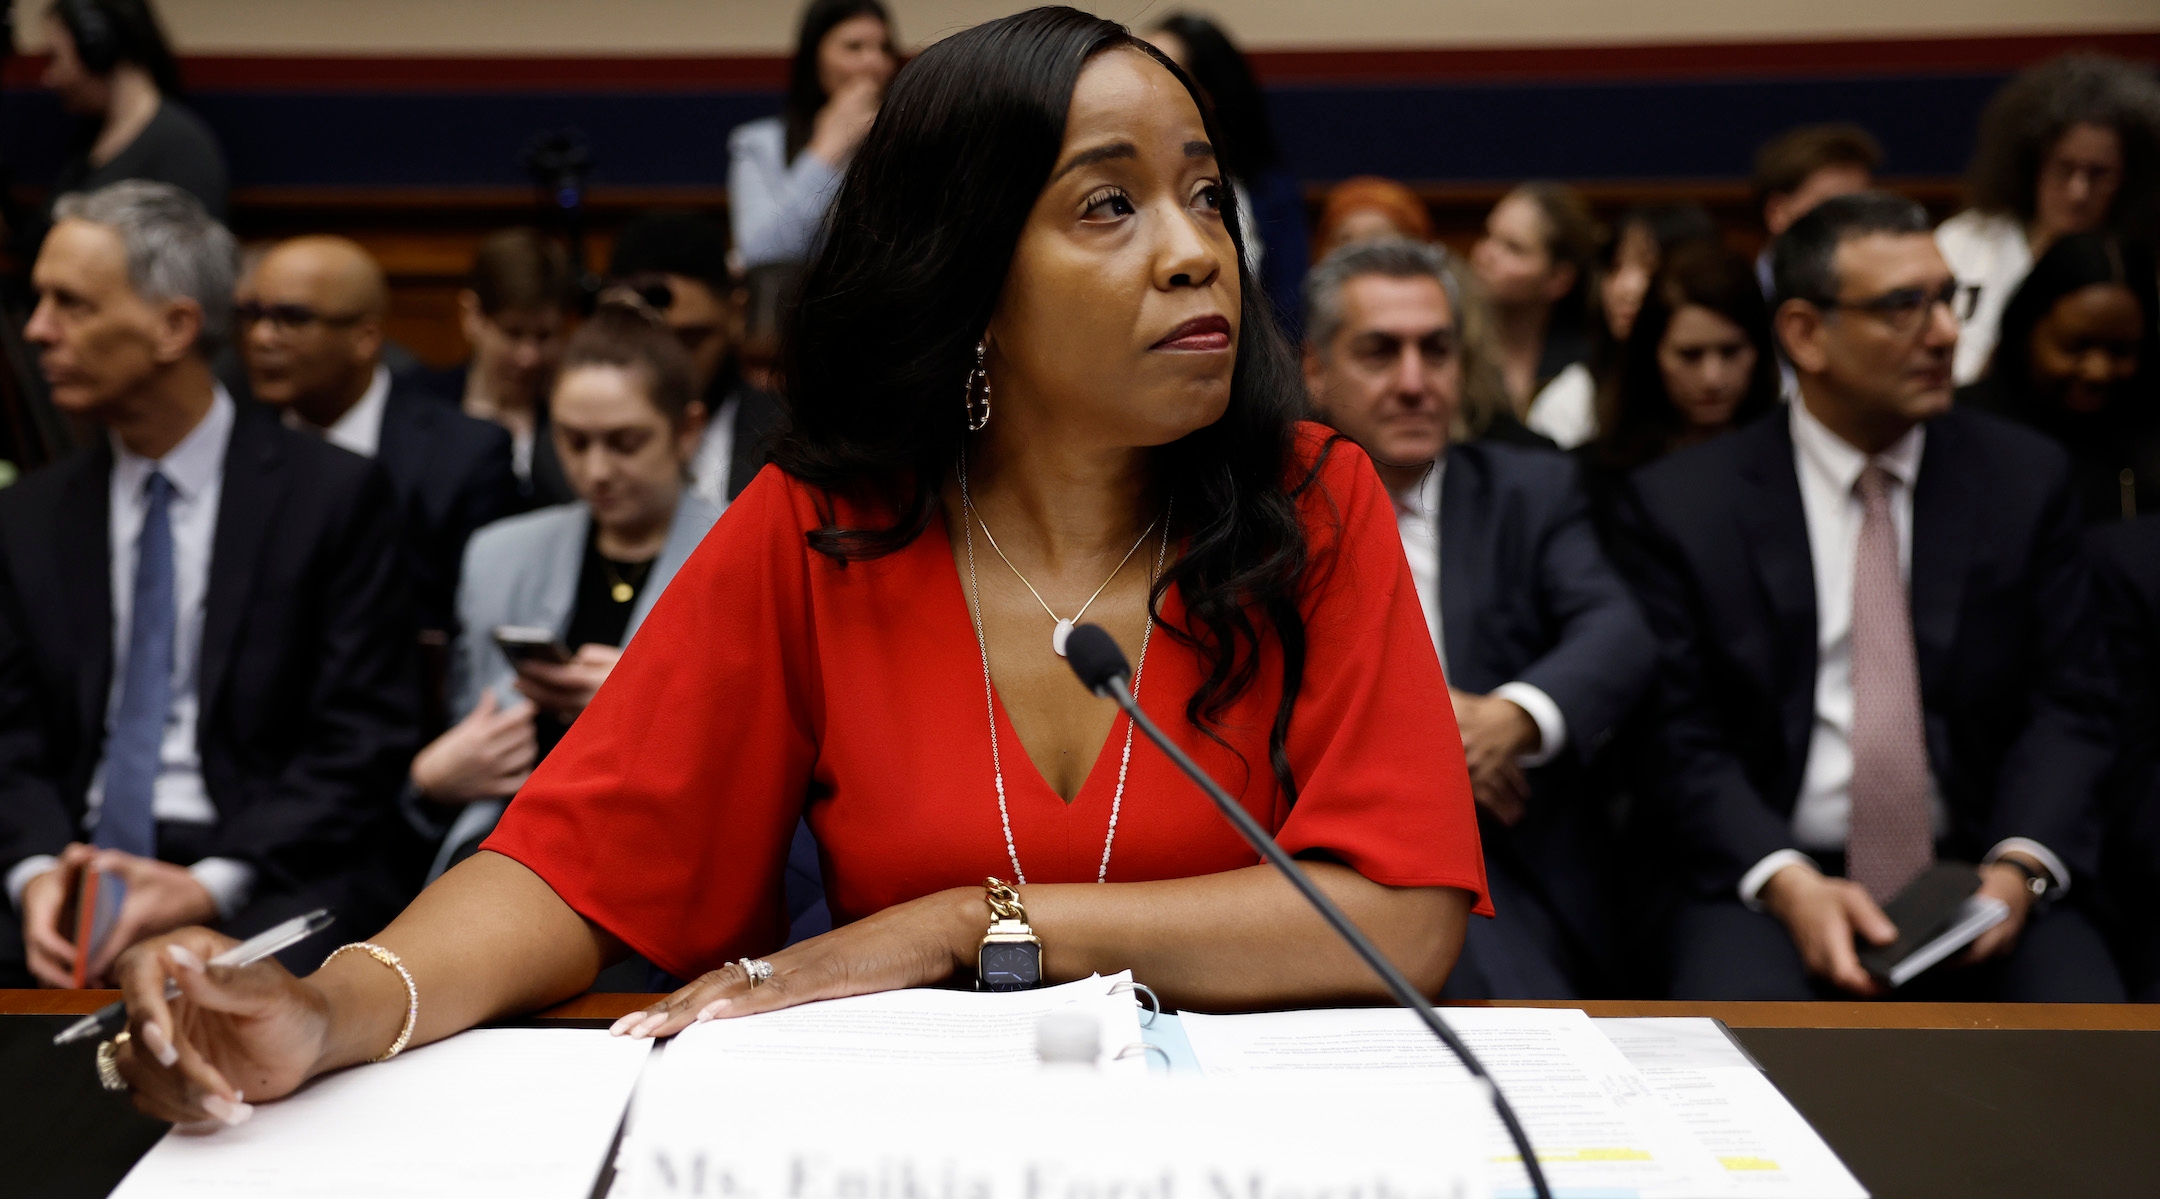 A superintendent listens during a U.S. House hearing